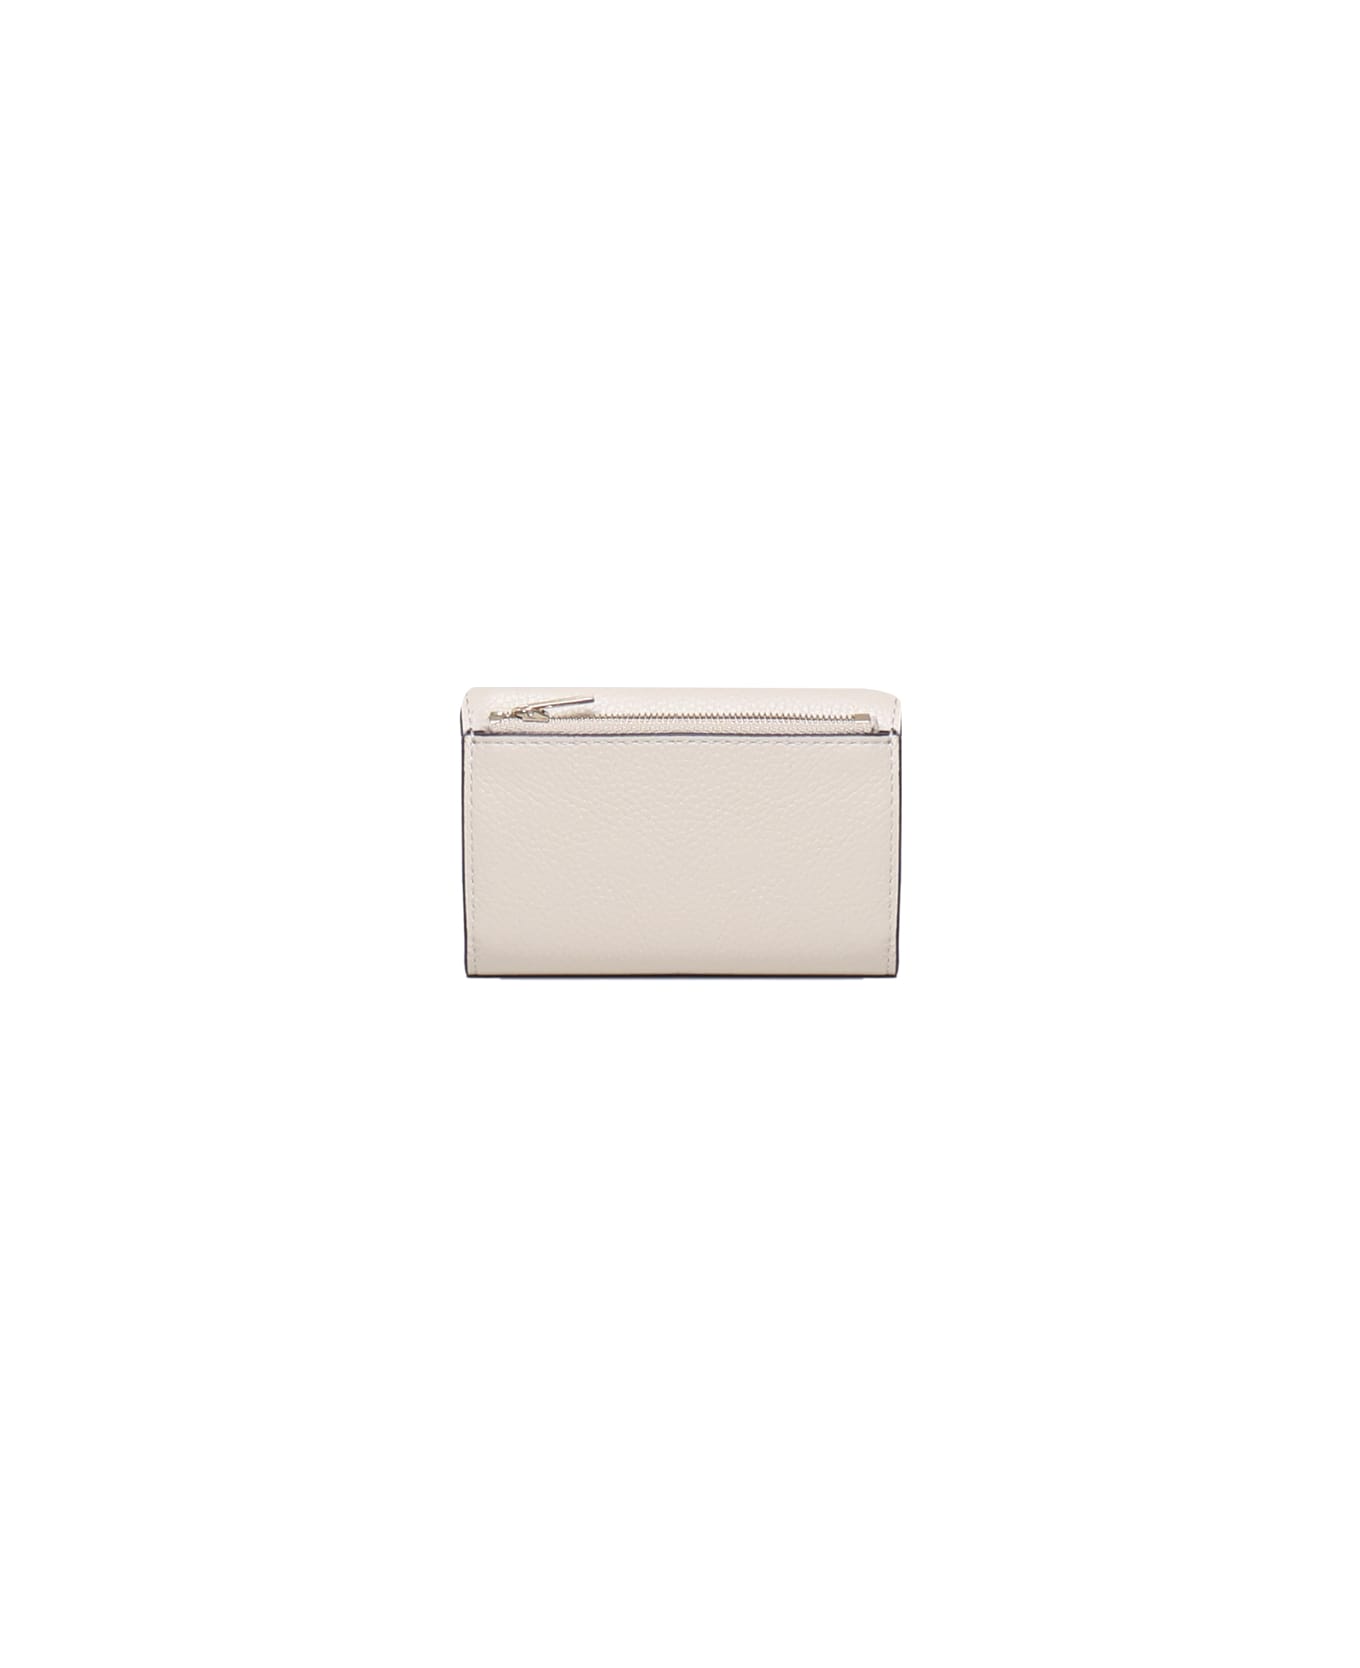 Mulberry Continental Trifold Wallet In Cowskin - Chalk 財布